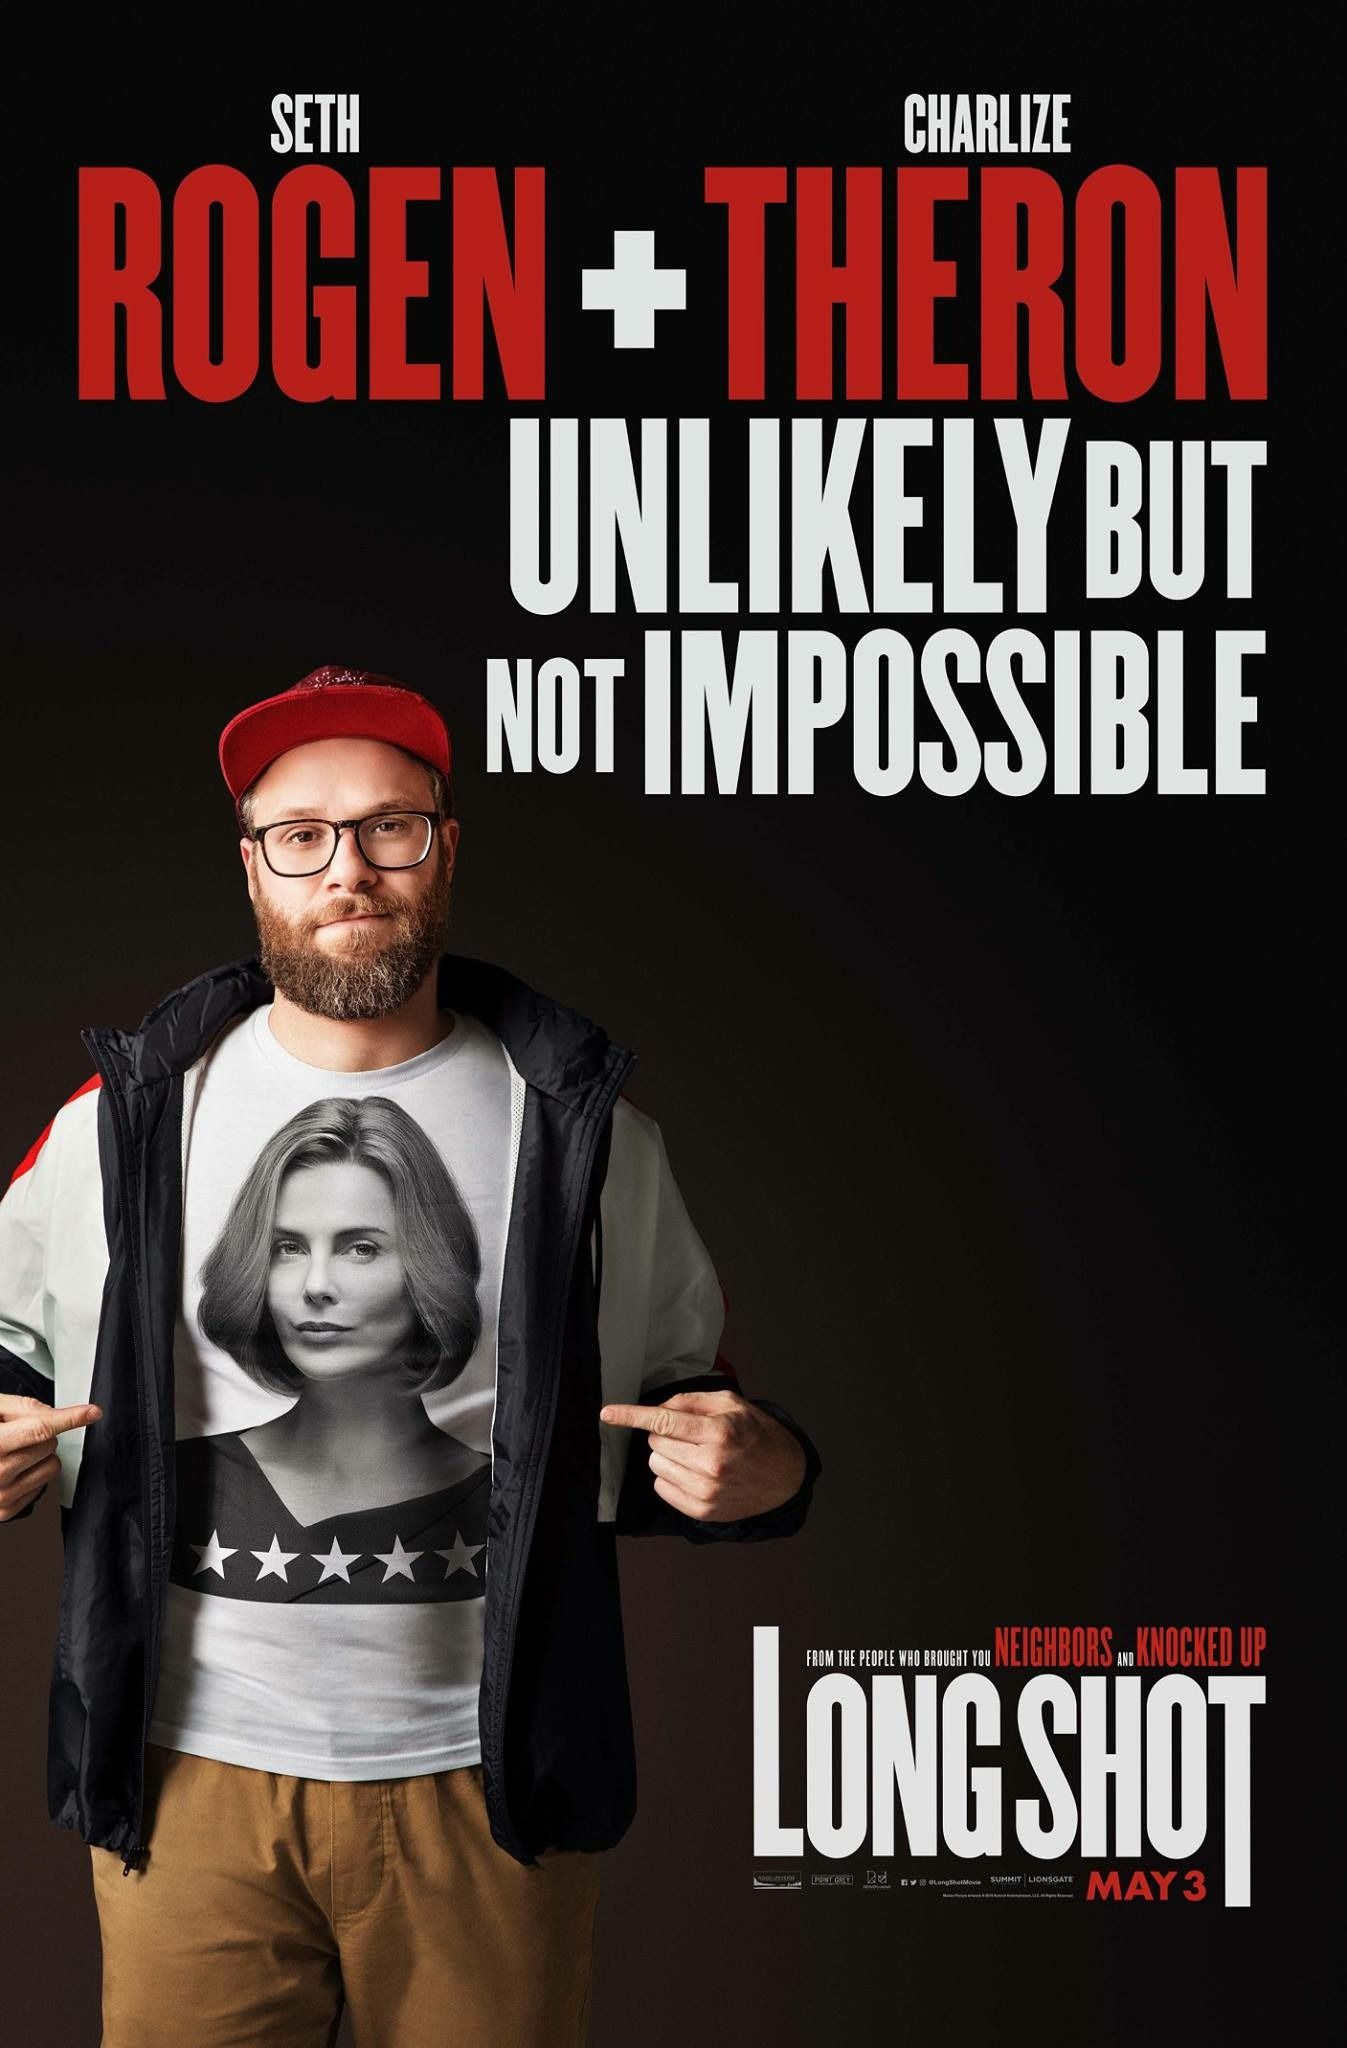 Long Shot Red Band Trailer Heaps Praise on Rogen & Theron’s Rom-Com